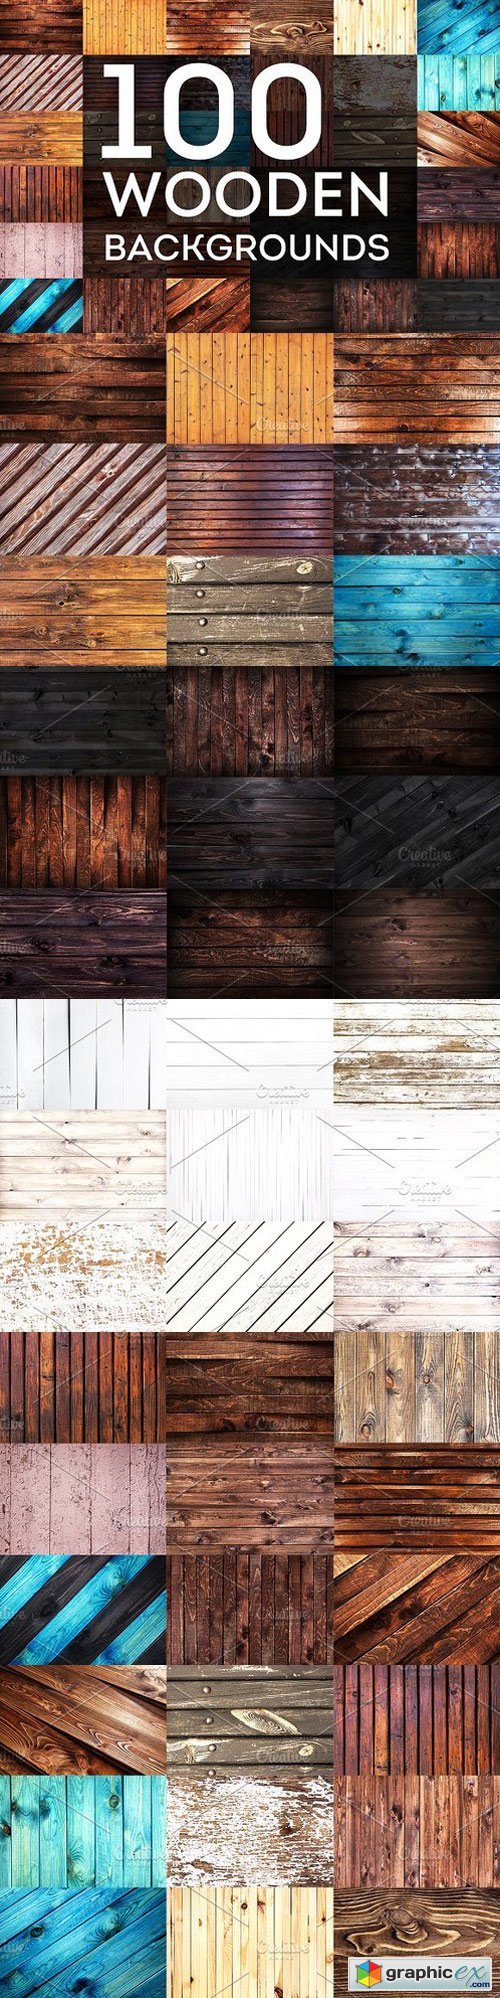 100 Wooden backgrounds